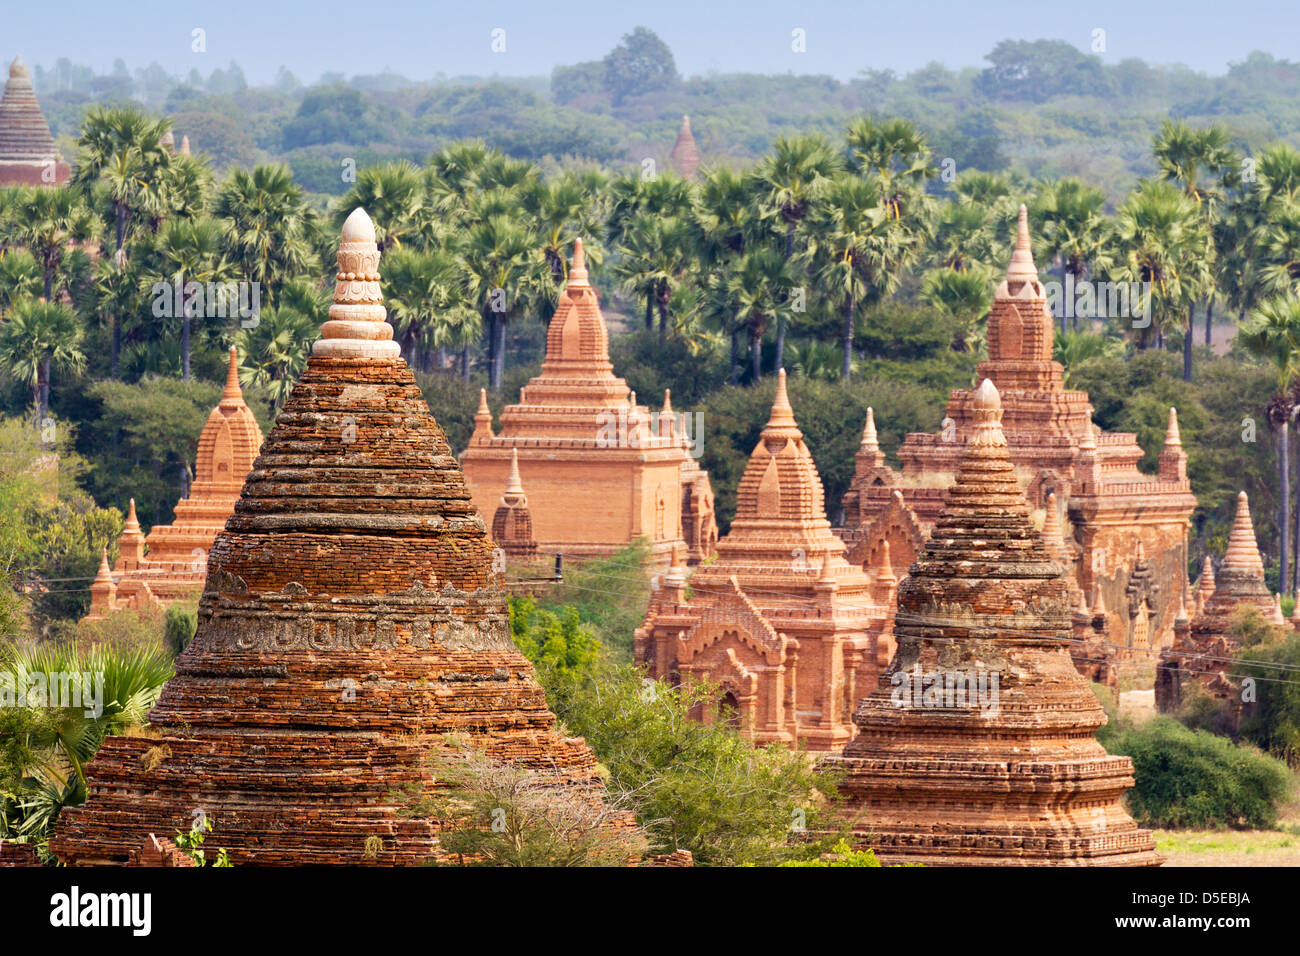 The Temples and Pagodas of Bagan, Myanmar - early morning 9 Stock Photo